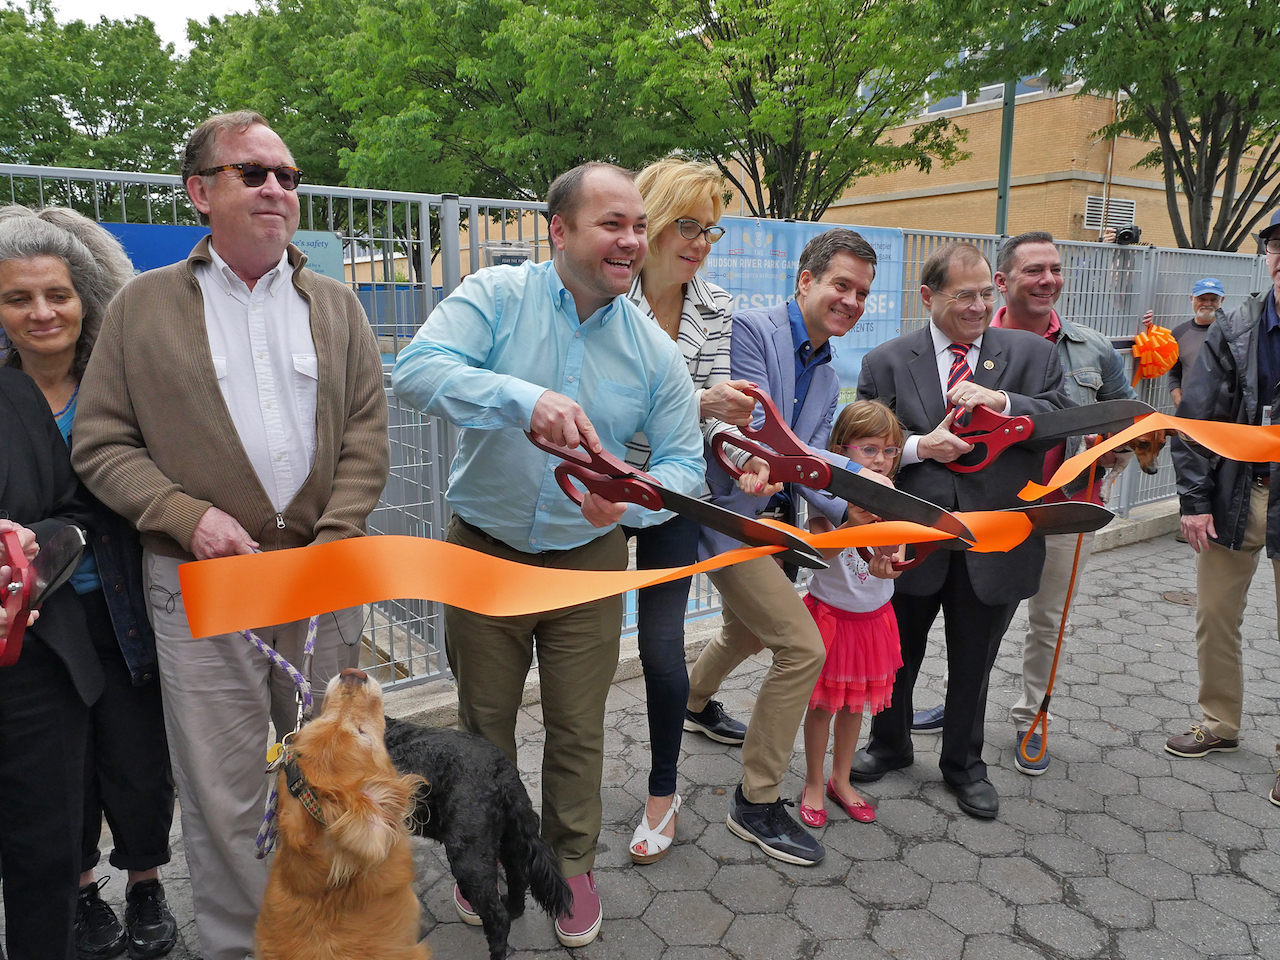 Local politicians, including Councilmember Corey Johnson, second from left, state Senator Brad Hoylman, fourth from left, Congressmember Jerrold Nadler, fifth from left, and Assemblymember Deborah Glick, not shown, joined dog run members and Hudson River Park Trust officials to cut the ribbon on the spruced-up new run.